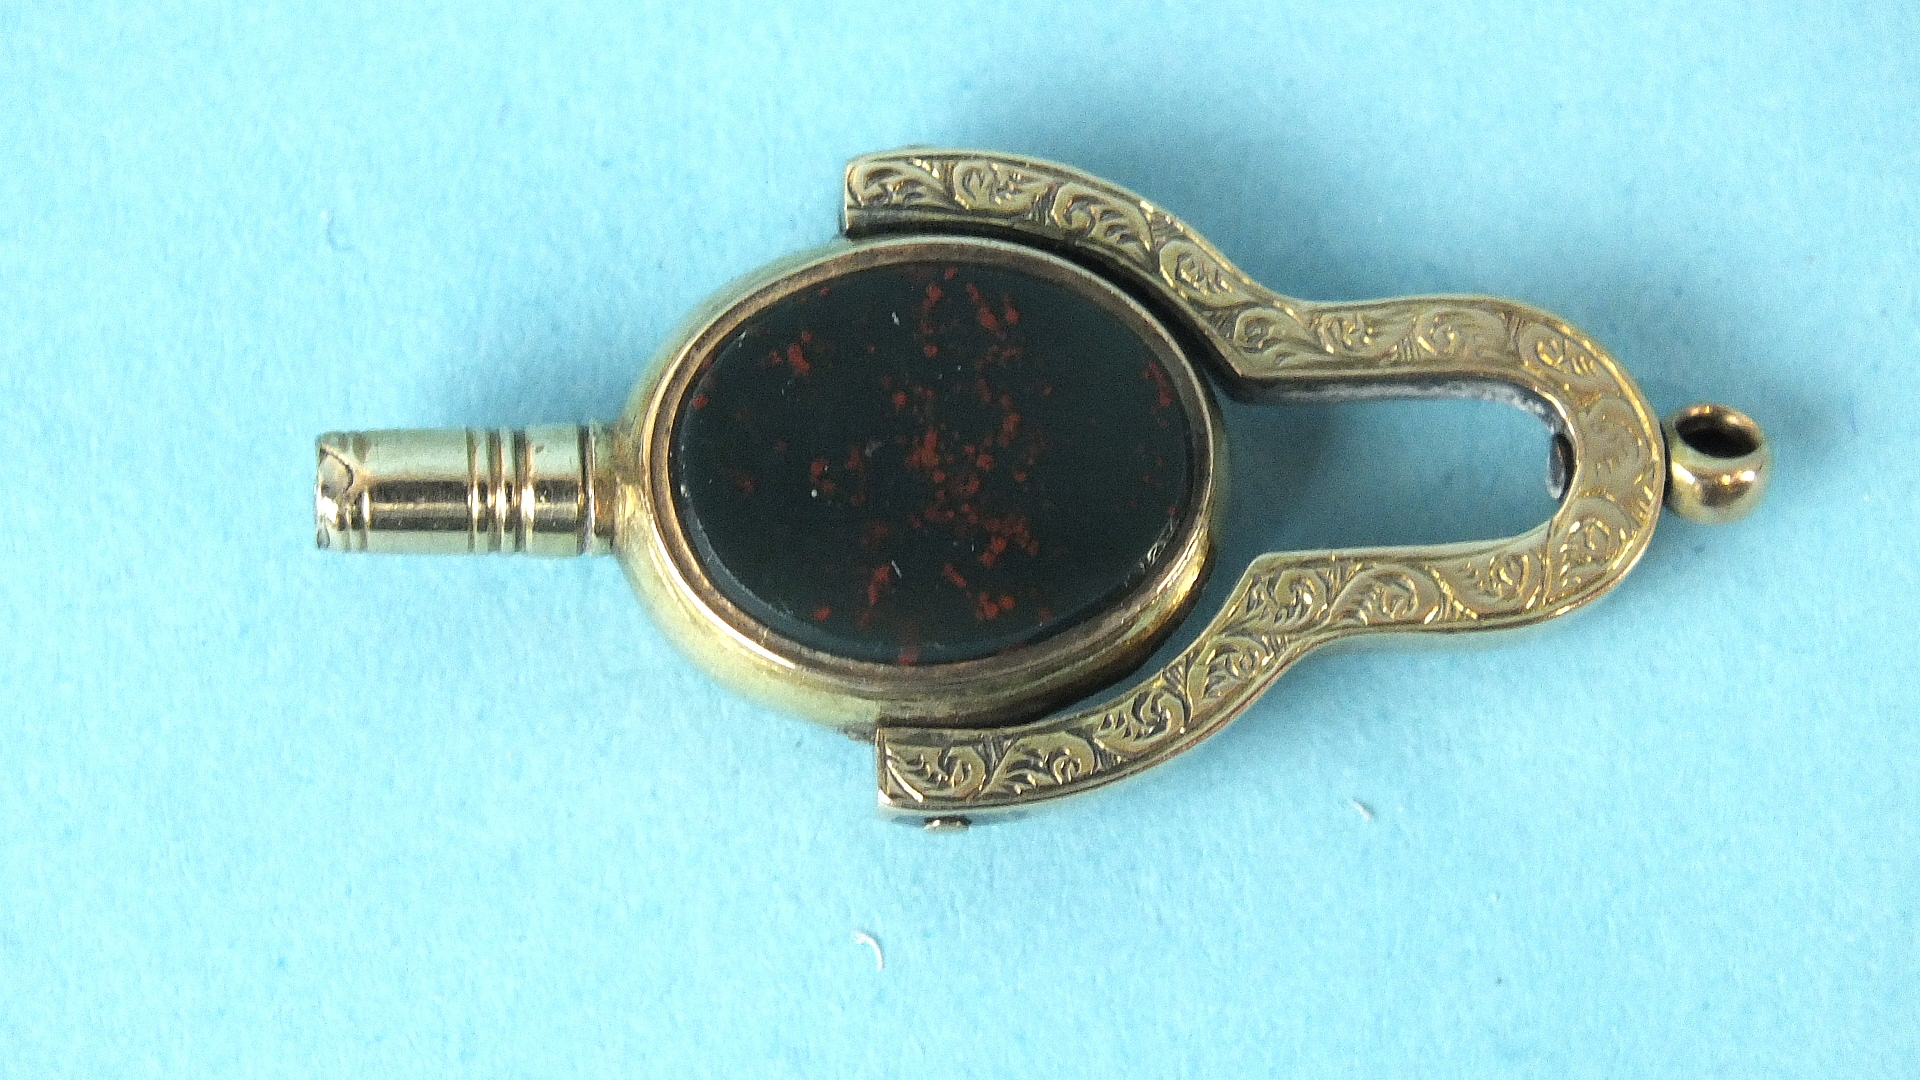 A 19th century swivel-fob watch key set bloodstone and agate, unmarked. - Image 2 of 2